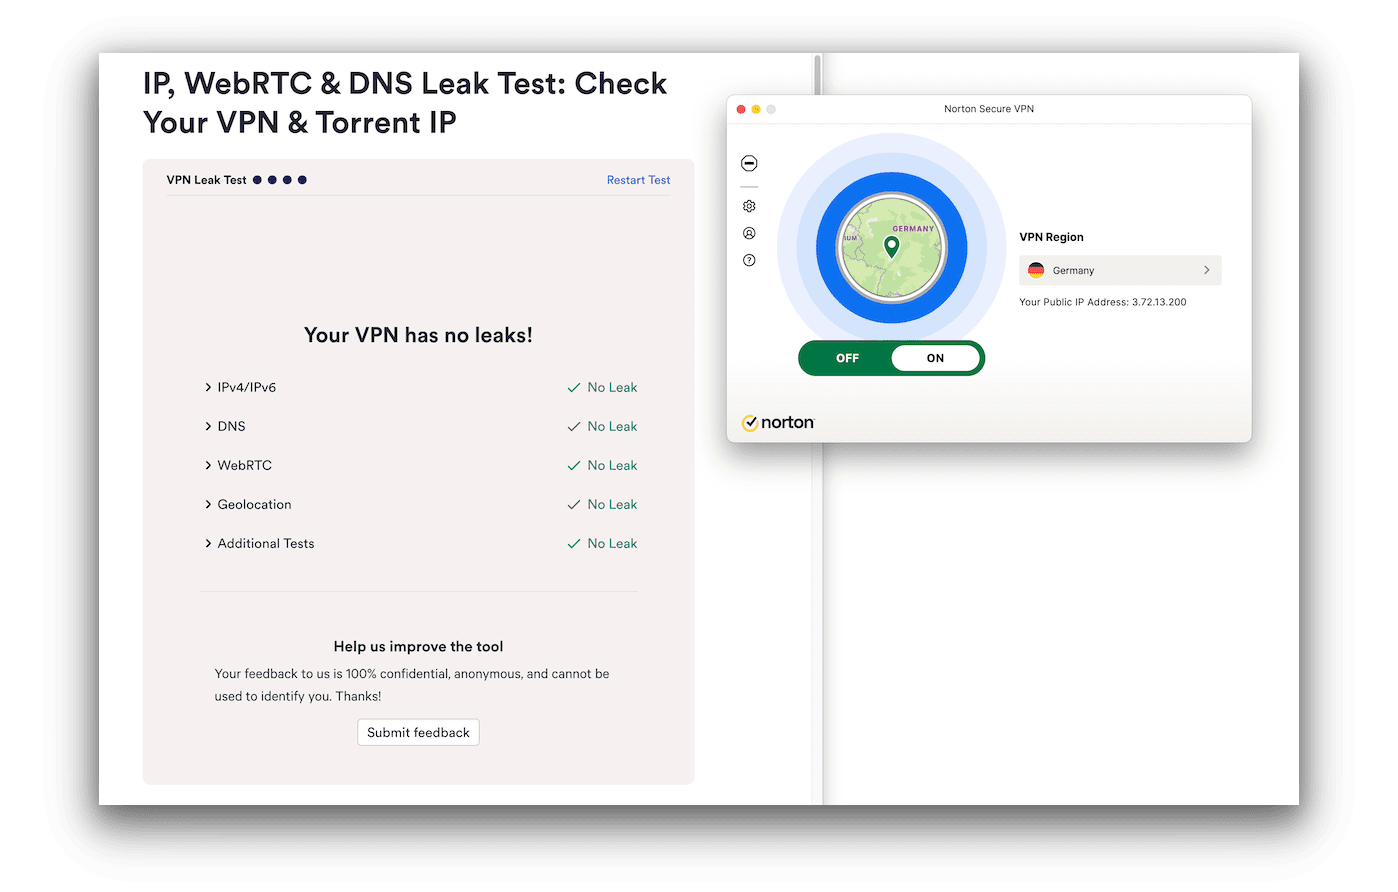 Norton Secure VPN running next to the results of a successful VPN leak test